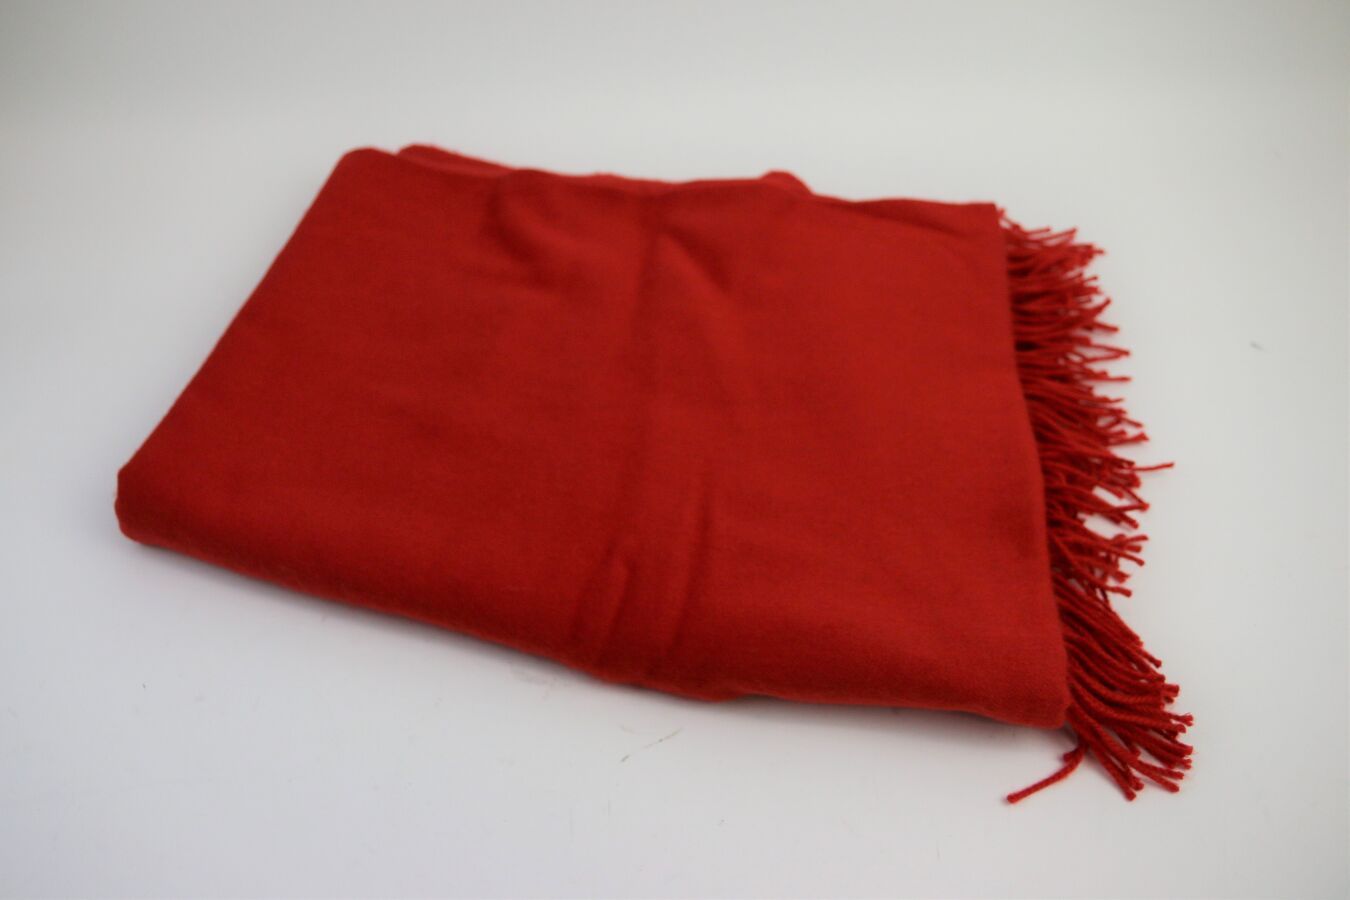 Null HERMES
Cashmere and red wool shawl
140 x 176 cm
(Good condition)